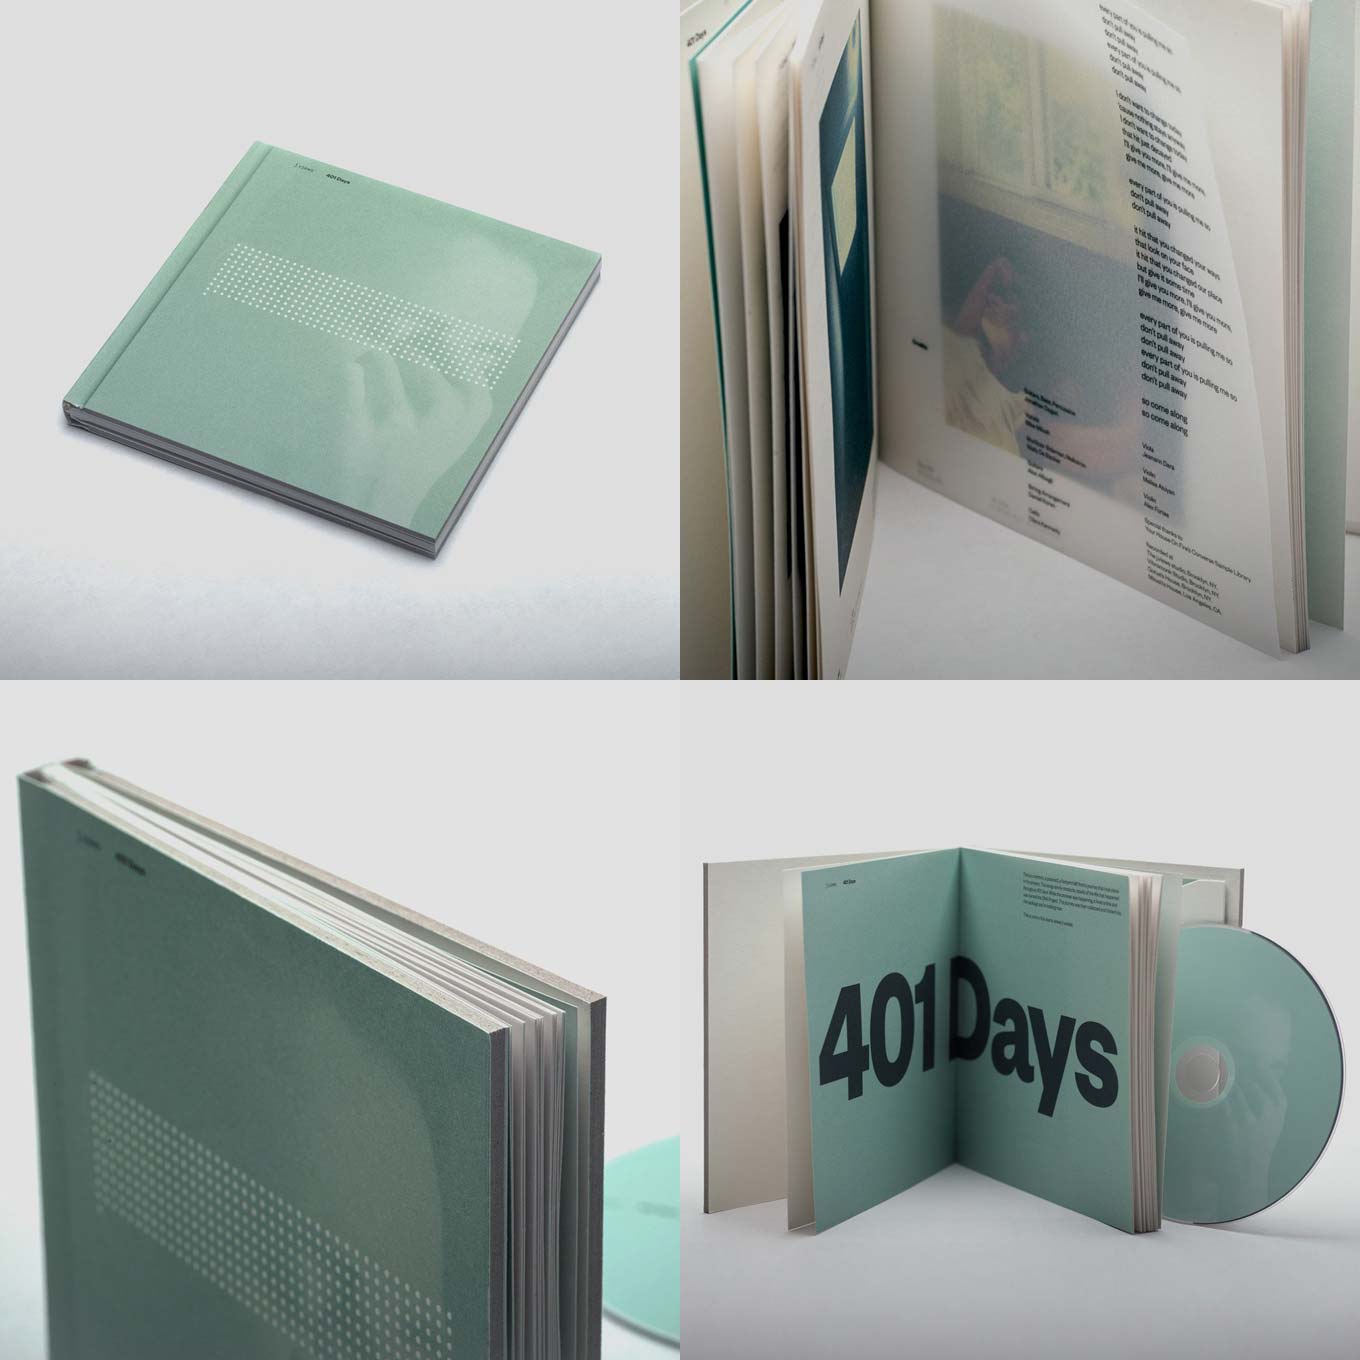 J.Views “401 Days” Special Edition CD package